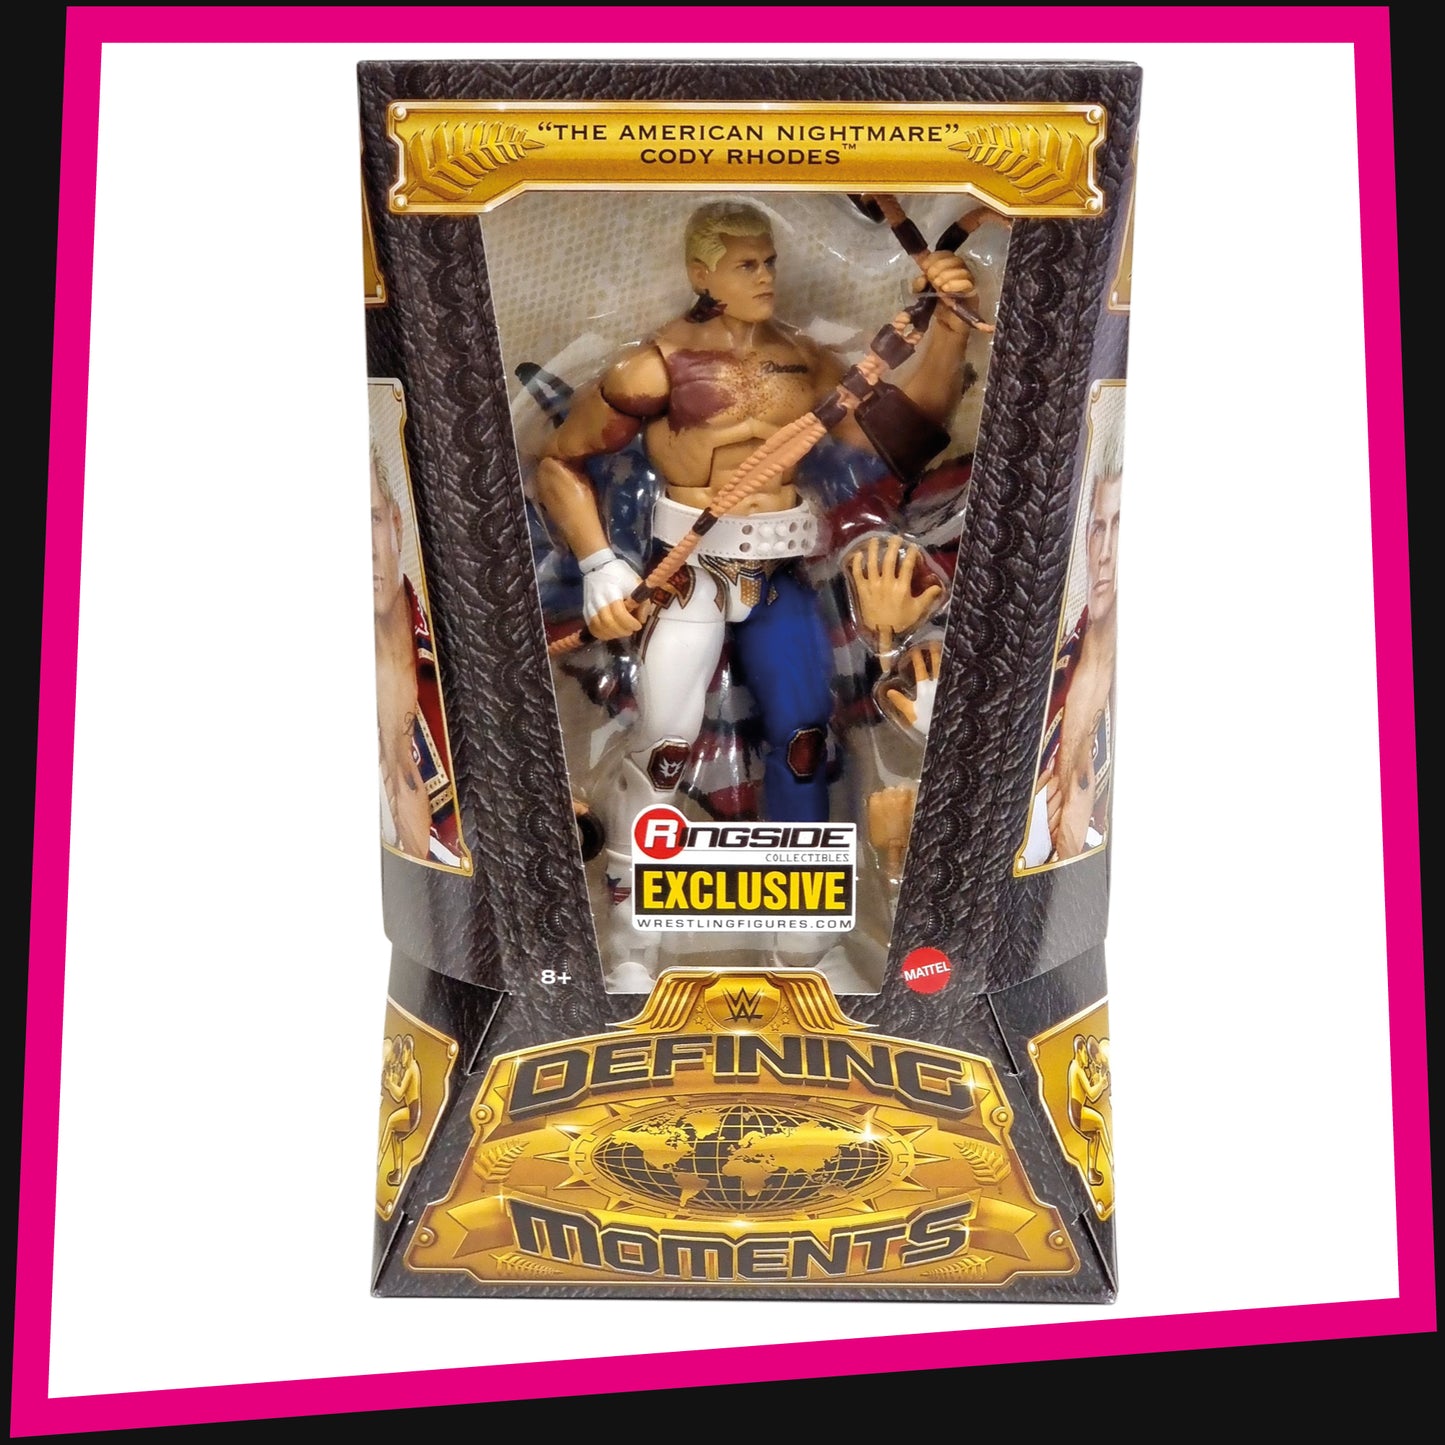 Cody Rhodes - Defining Moments Ringside Collectibles Exclusive WWE Mattel